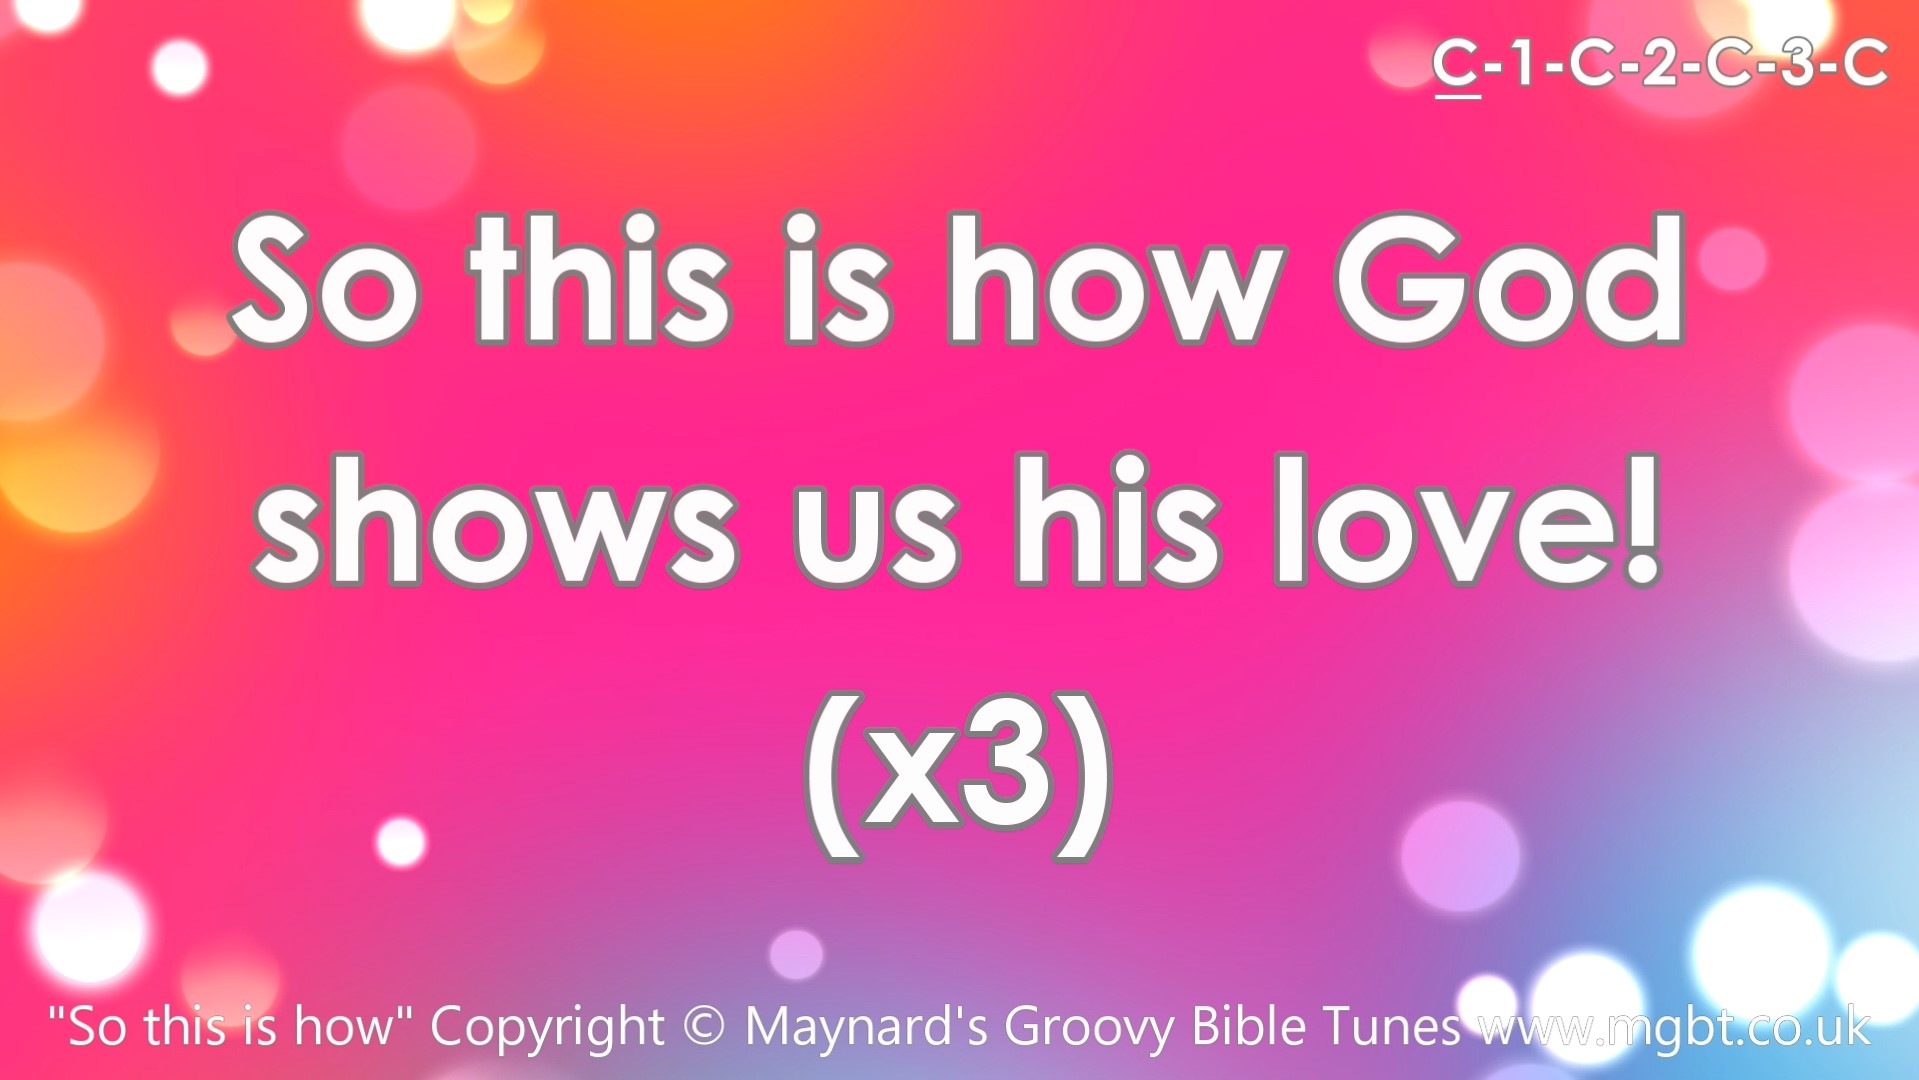 screenshot from video with lyrics "So this is how God shows us his love"